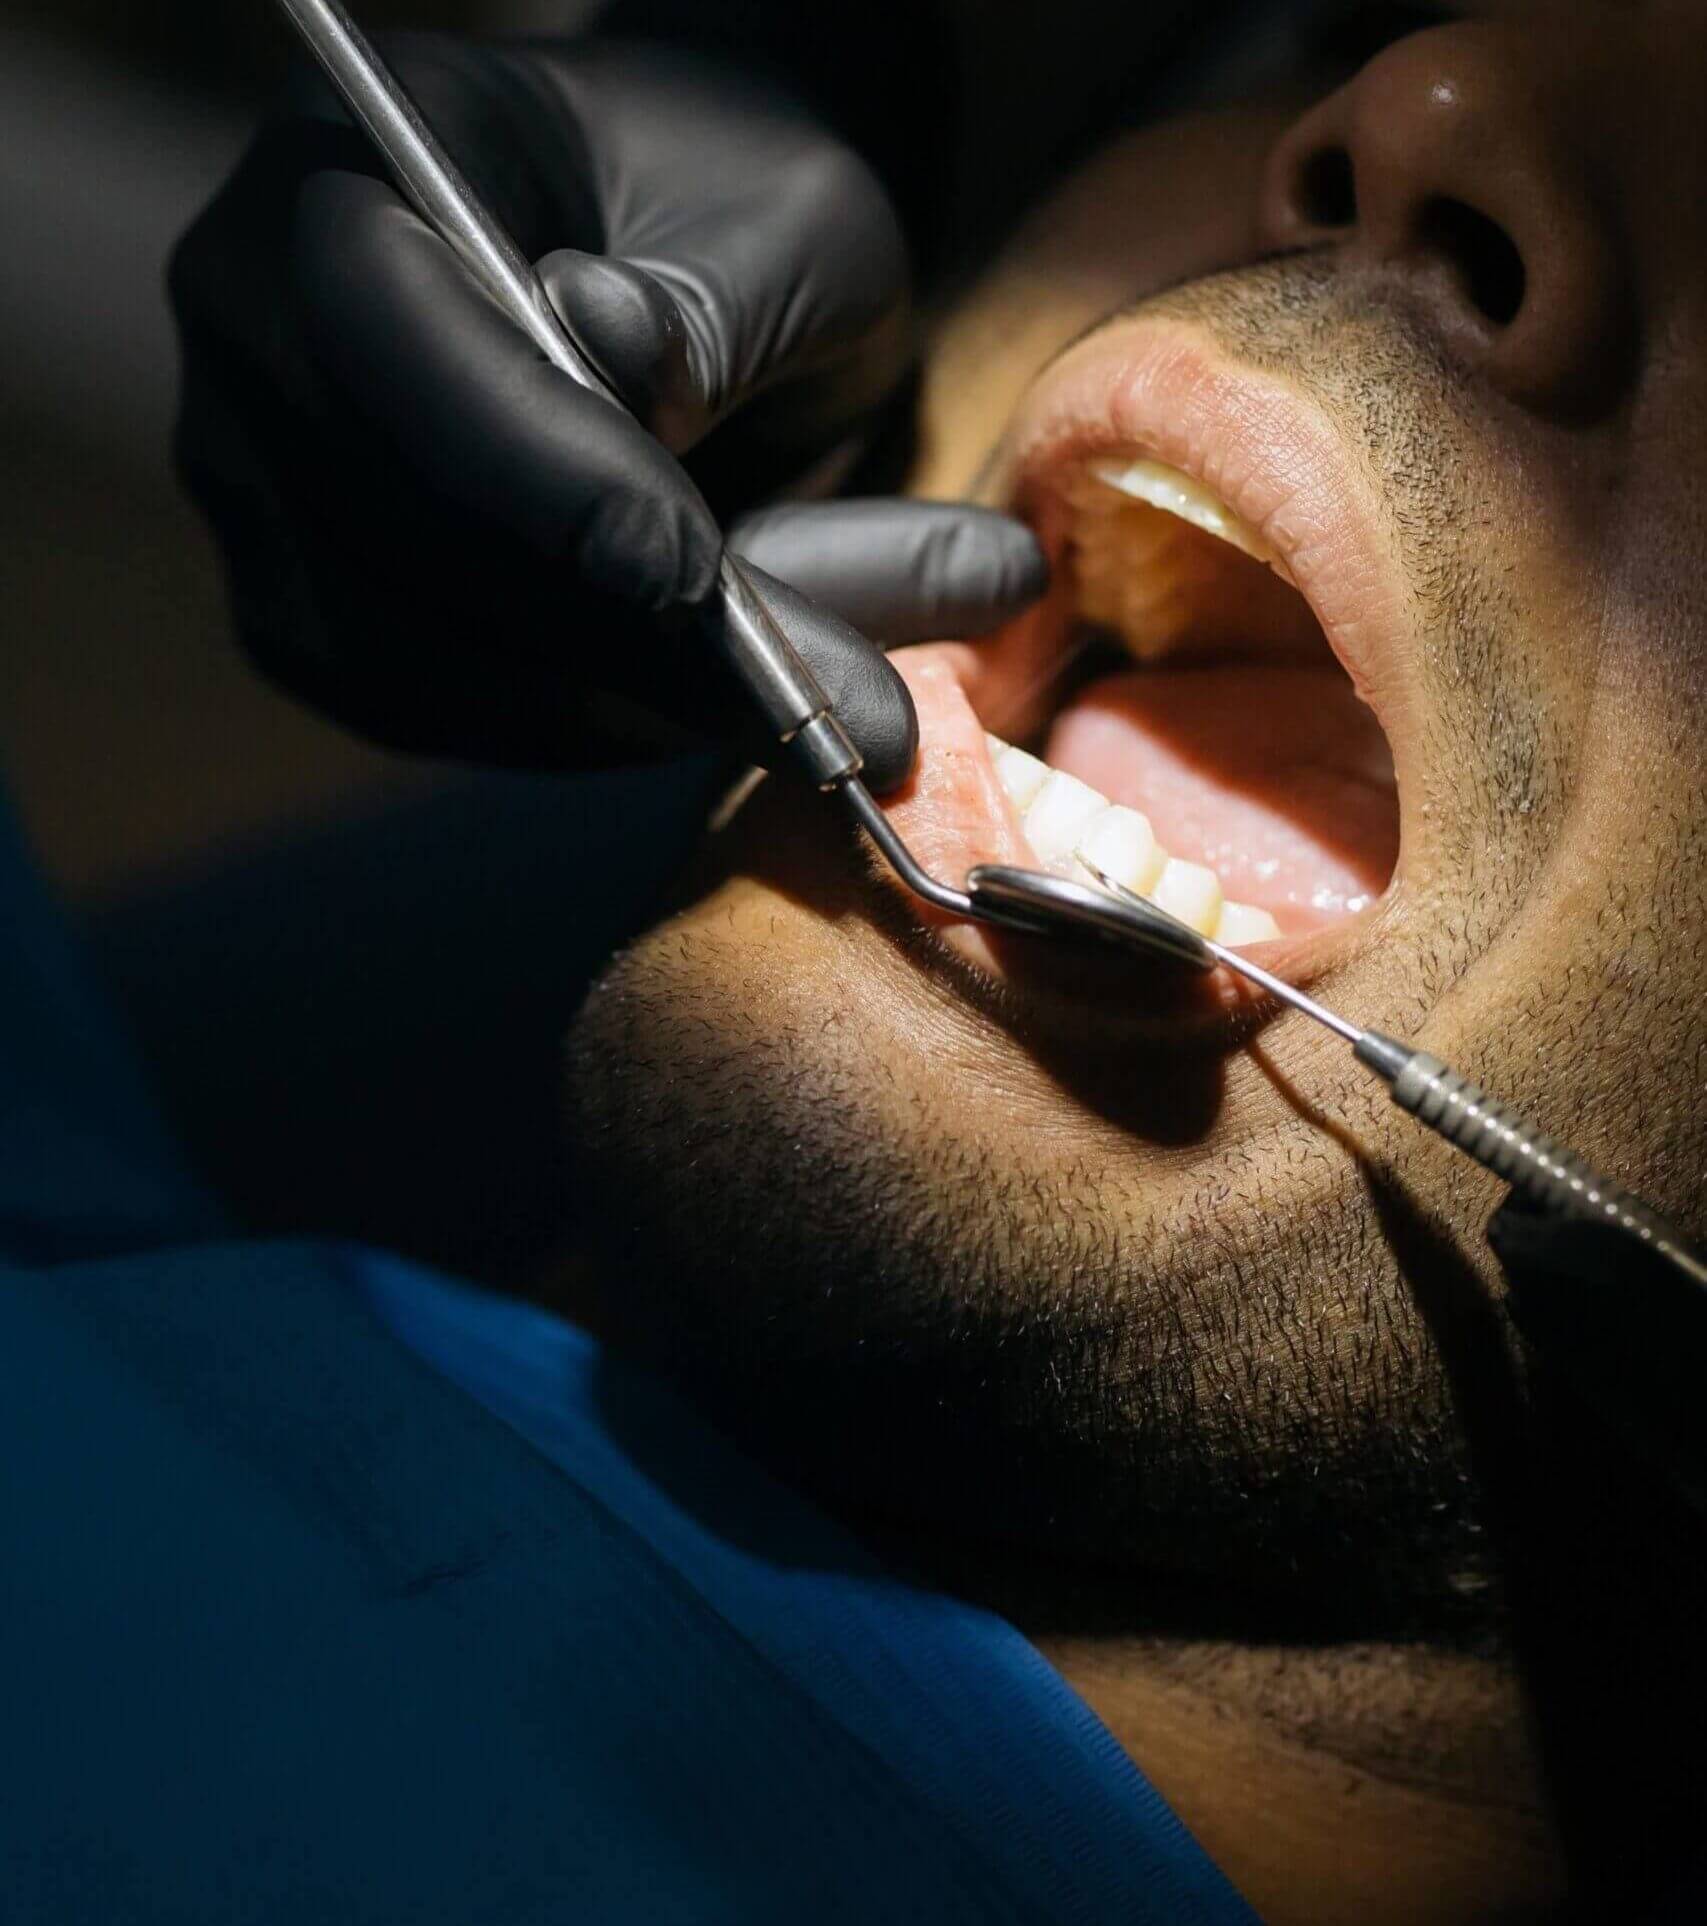 A patient being treated by our emergency dentist in Garland, TX